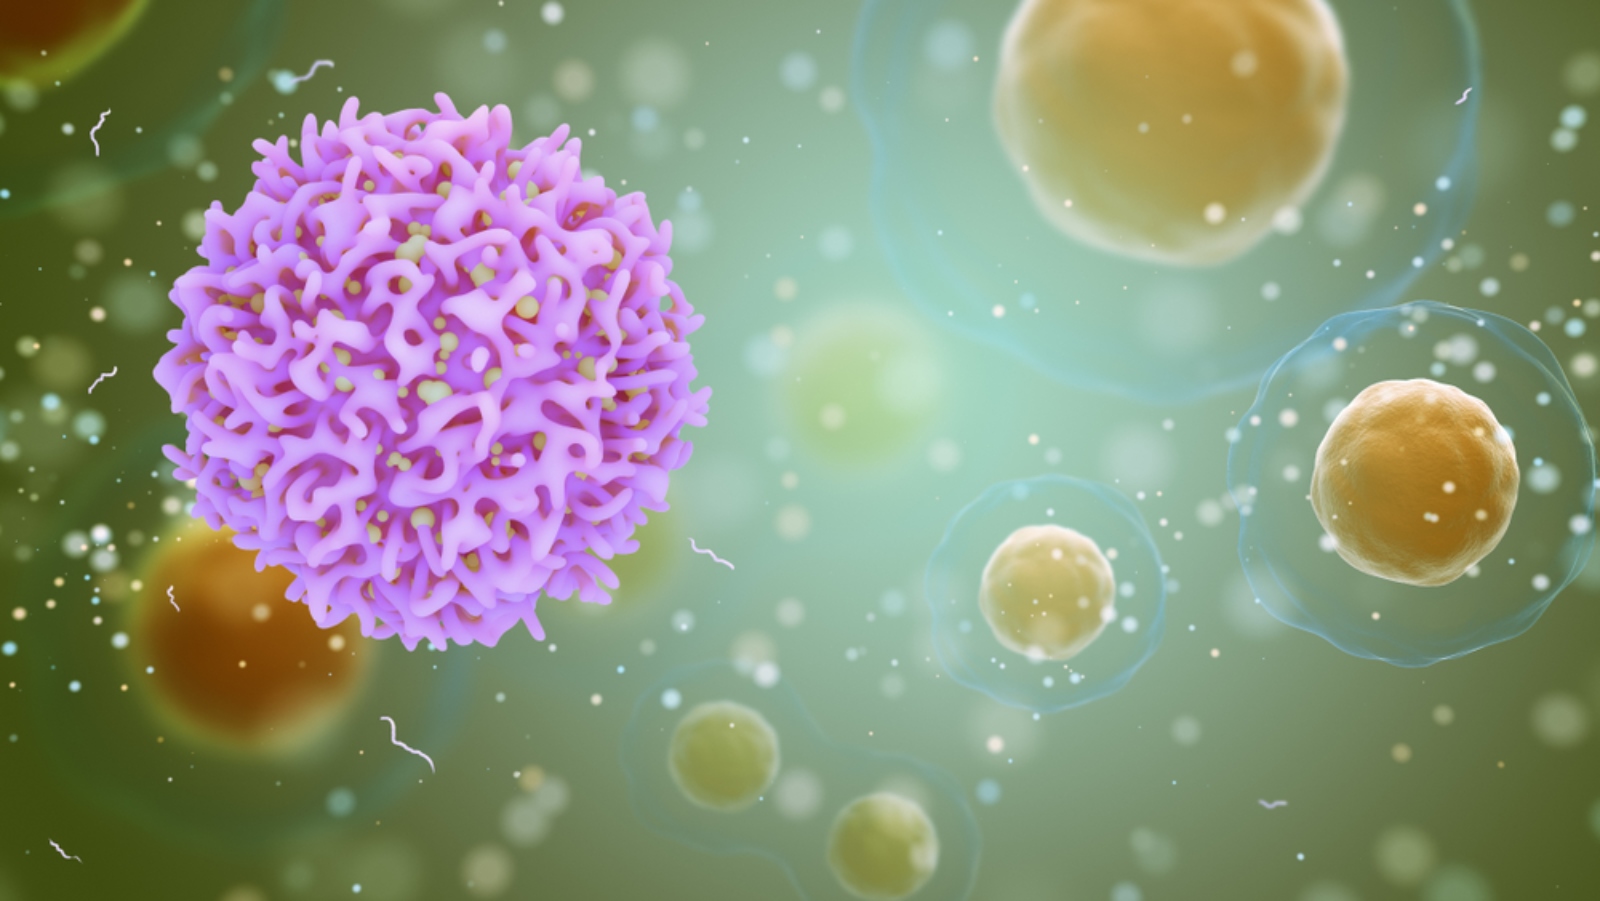 Natural killer cells are an important part of the body’s immuno-surveillance system that can recognize and kill cancerous cells.Image by K_E_N/Shutterstock.coma